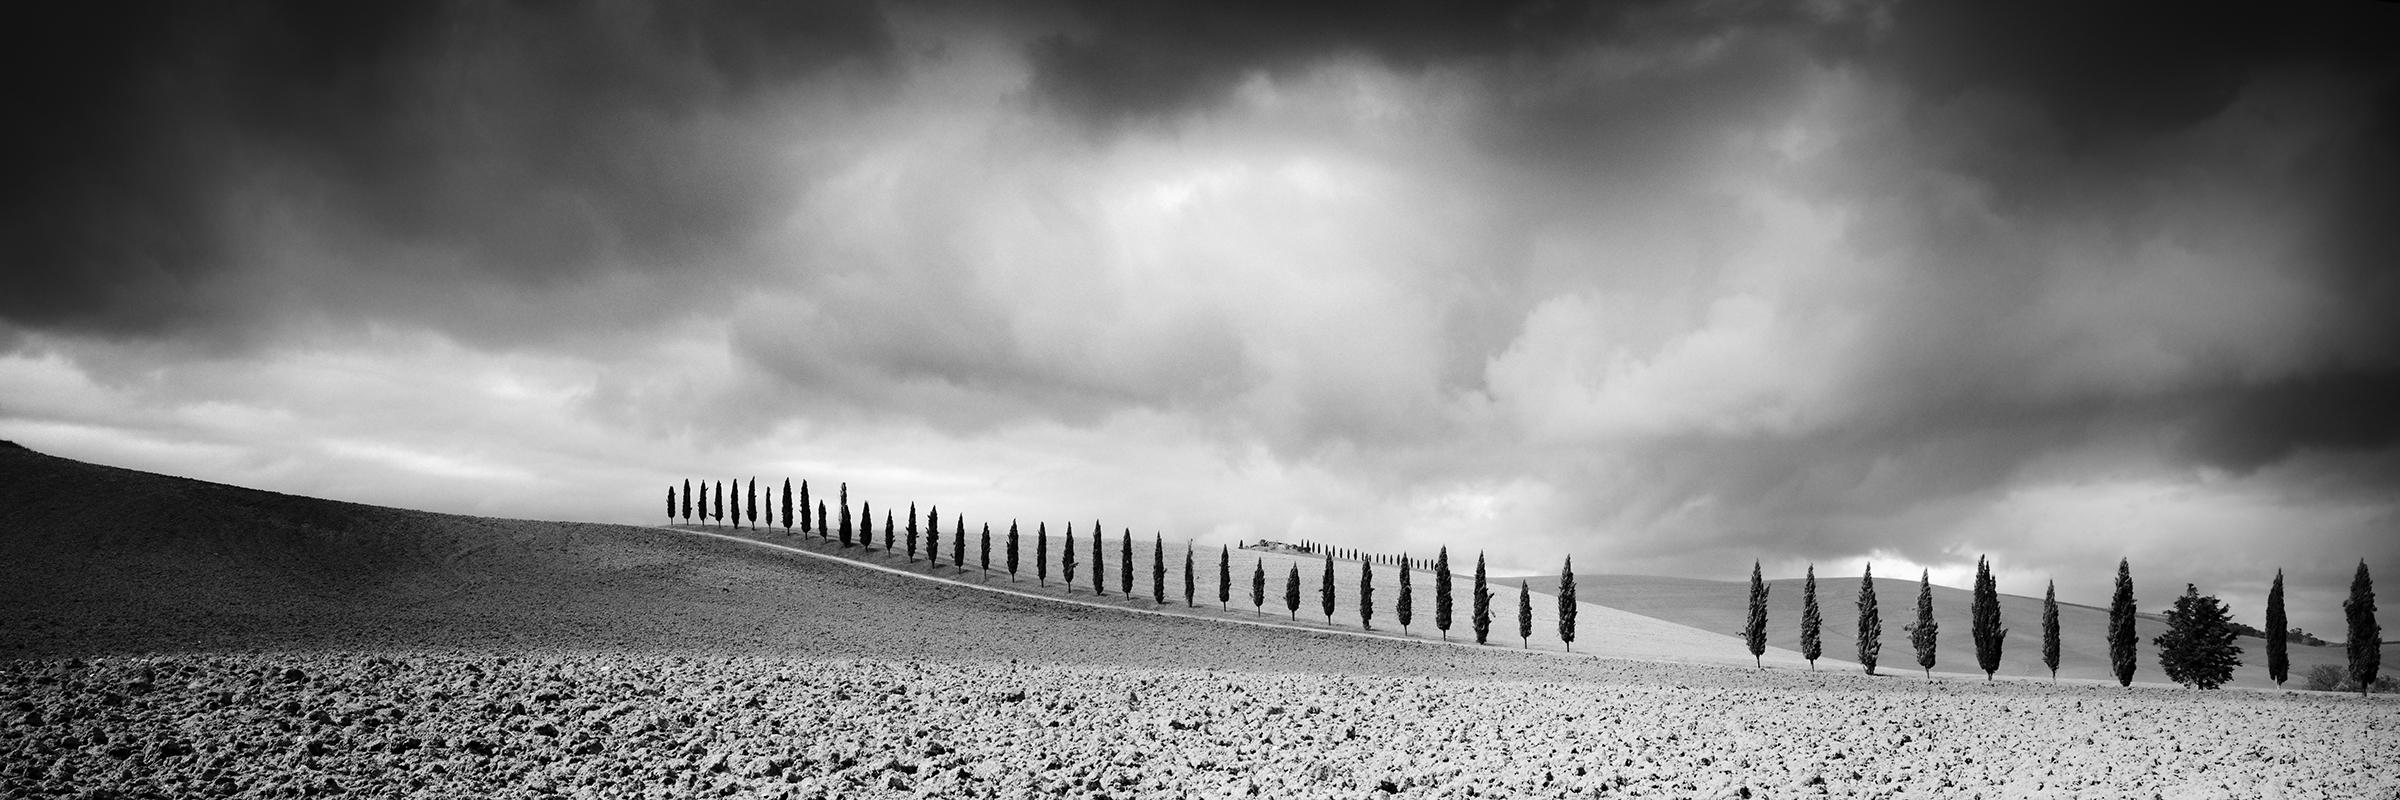 Gerald Berghammer Black and White Photograph - Cypress Tree Avenue, Panorama, Tuscany, black and white photography, landscape